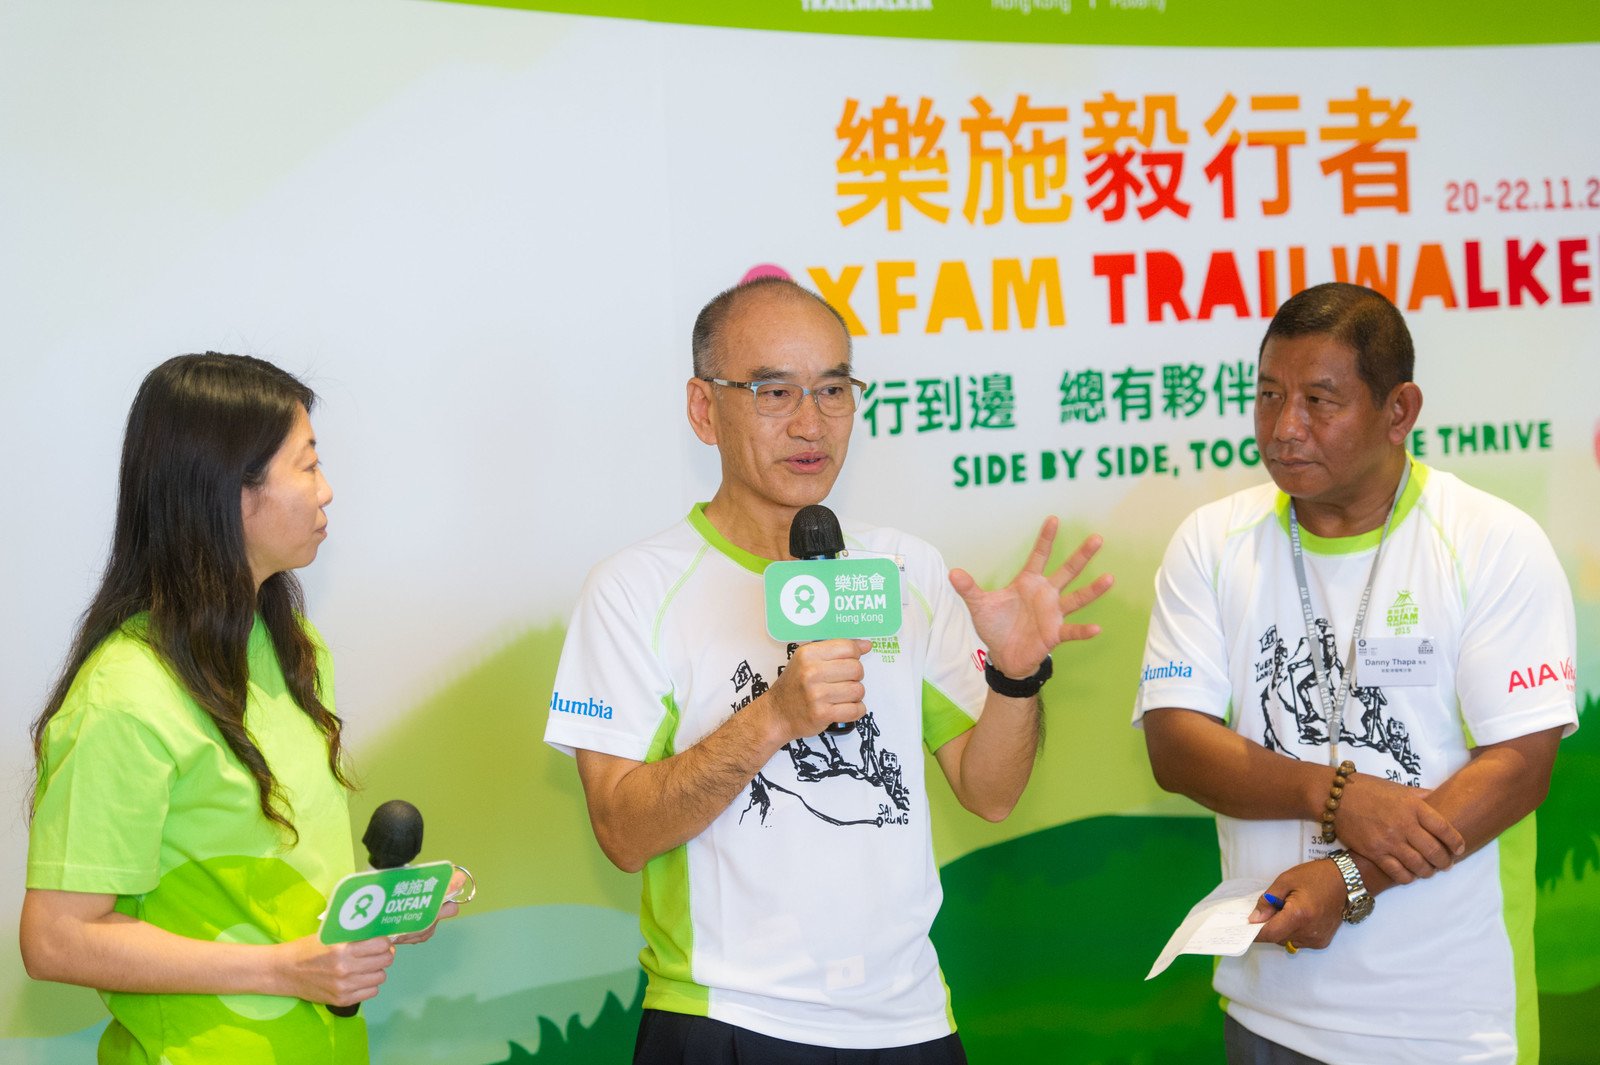 The experiences Danny Thapa (right) and Dr. Alphonse Poon (middle) shared clearly demonstrated the spirit of partnership, which is integral to Oxfam’s poverty alleviation and disaster relief work.